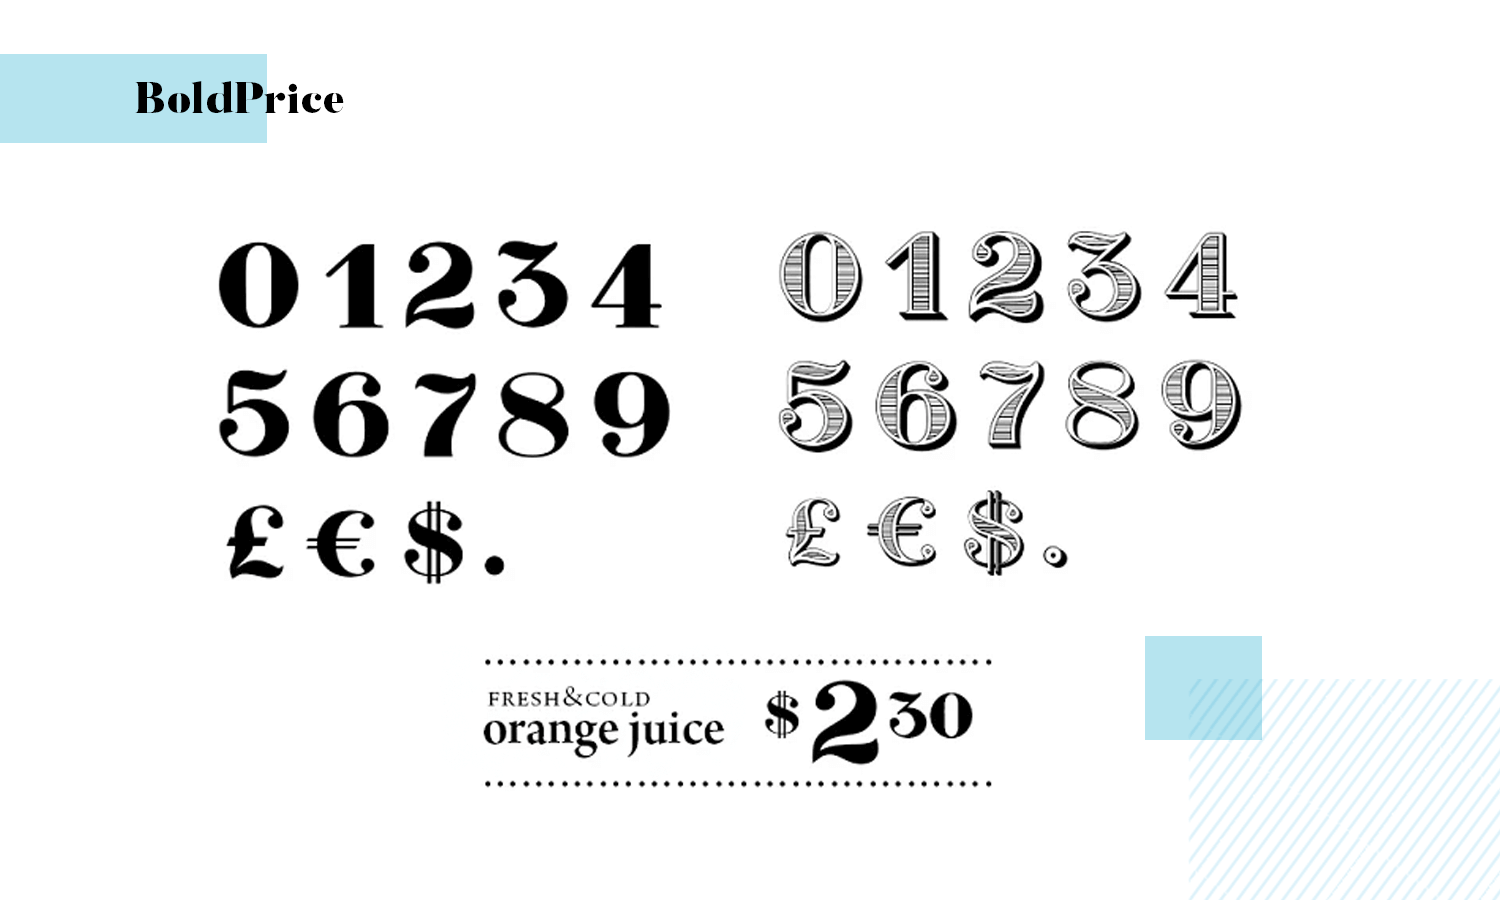 boldprice paid number font